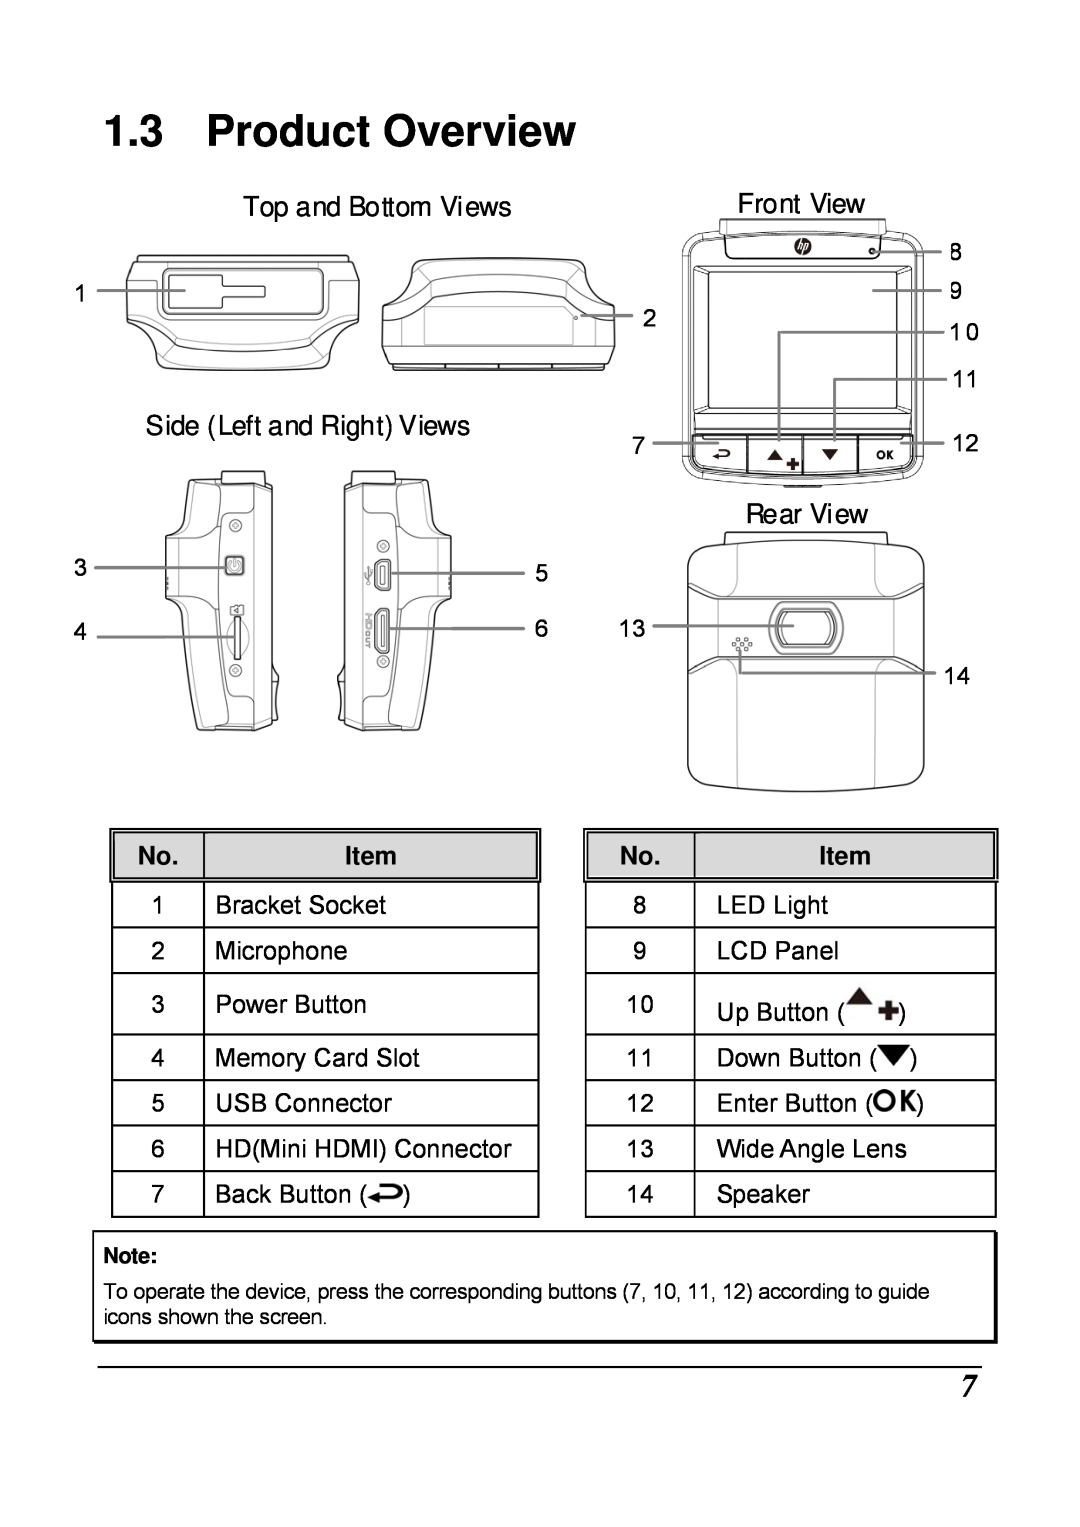 HP f210 Car manual Product Overview, Top and Bottom Views, Front View, Side Left and Right Views, Rear View 